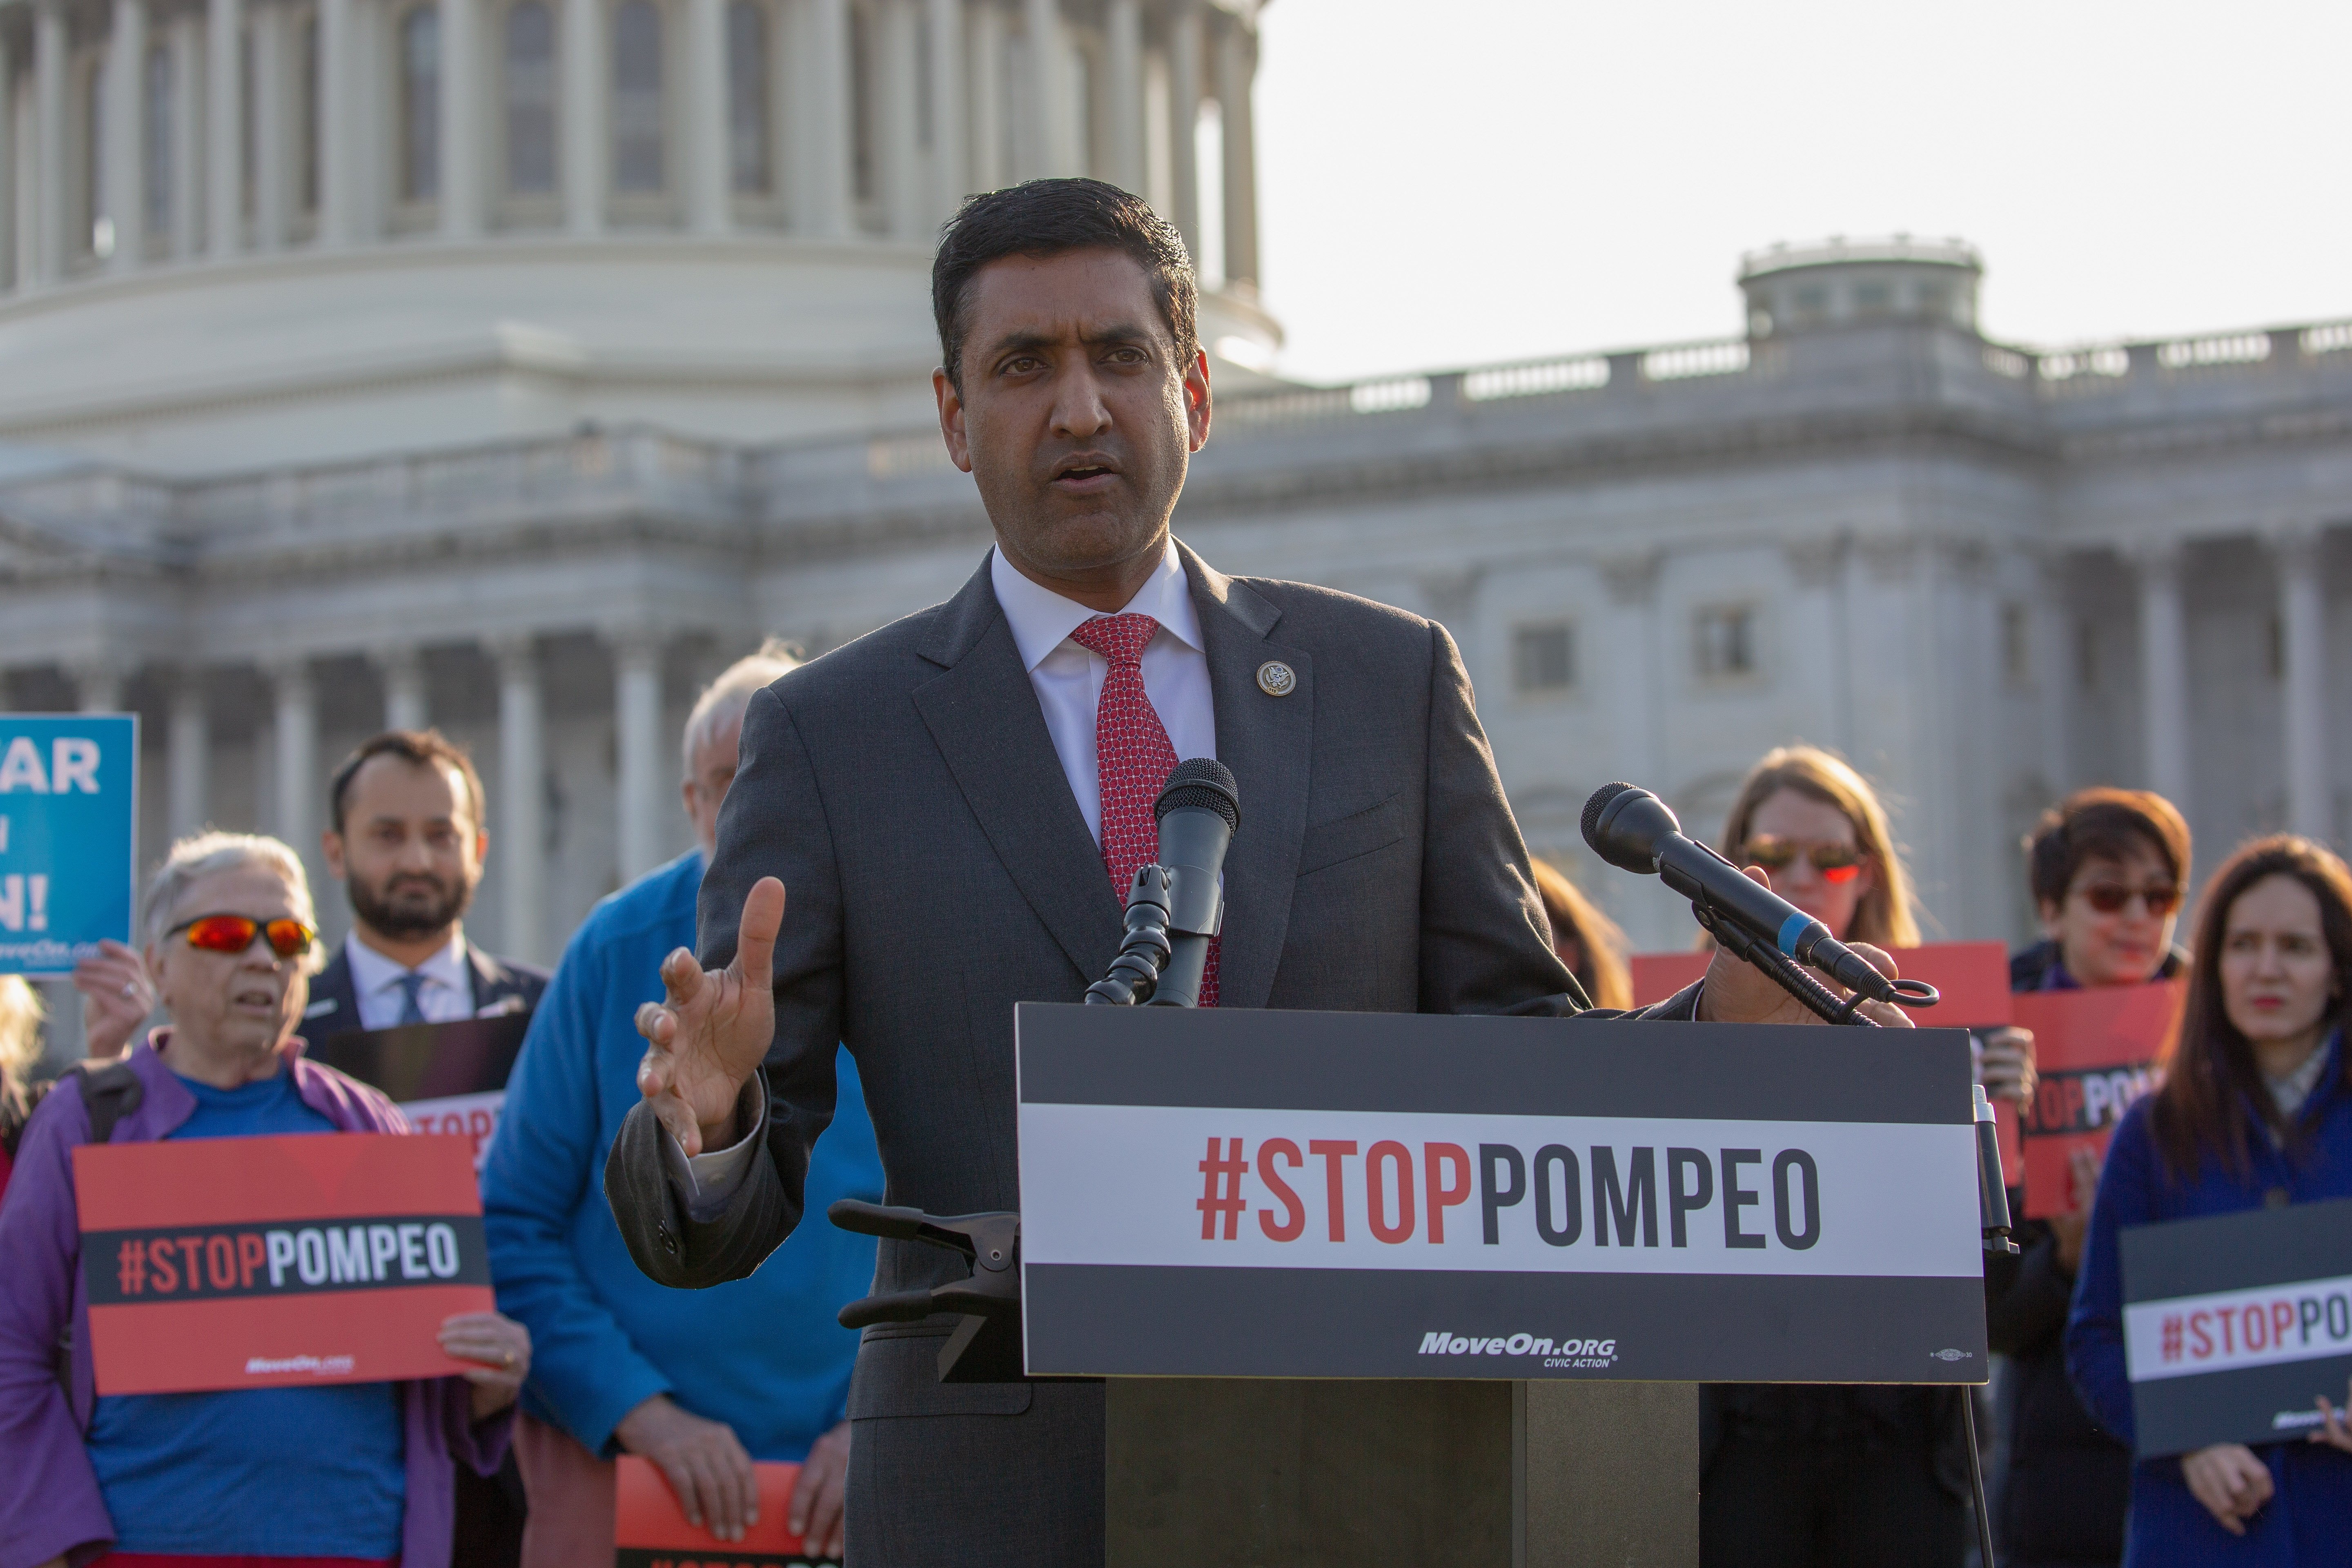 Rep Ro Khanna speaks at a rally with MoveOn members and allies gather with leading senators to demand that the Senate vote to reject Mike Pompeo's nomination for Secretary of State at US Capitol on April 11, 2018 in Washington, DC. (Photo by Tasos Katopodis/Getty Images for MoveOn.org)